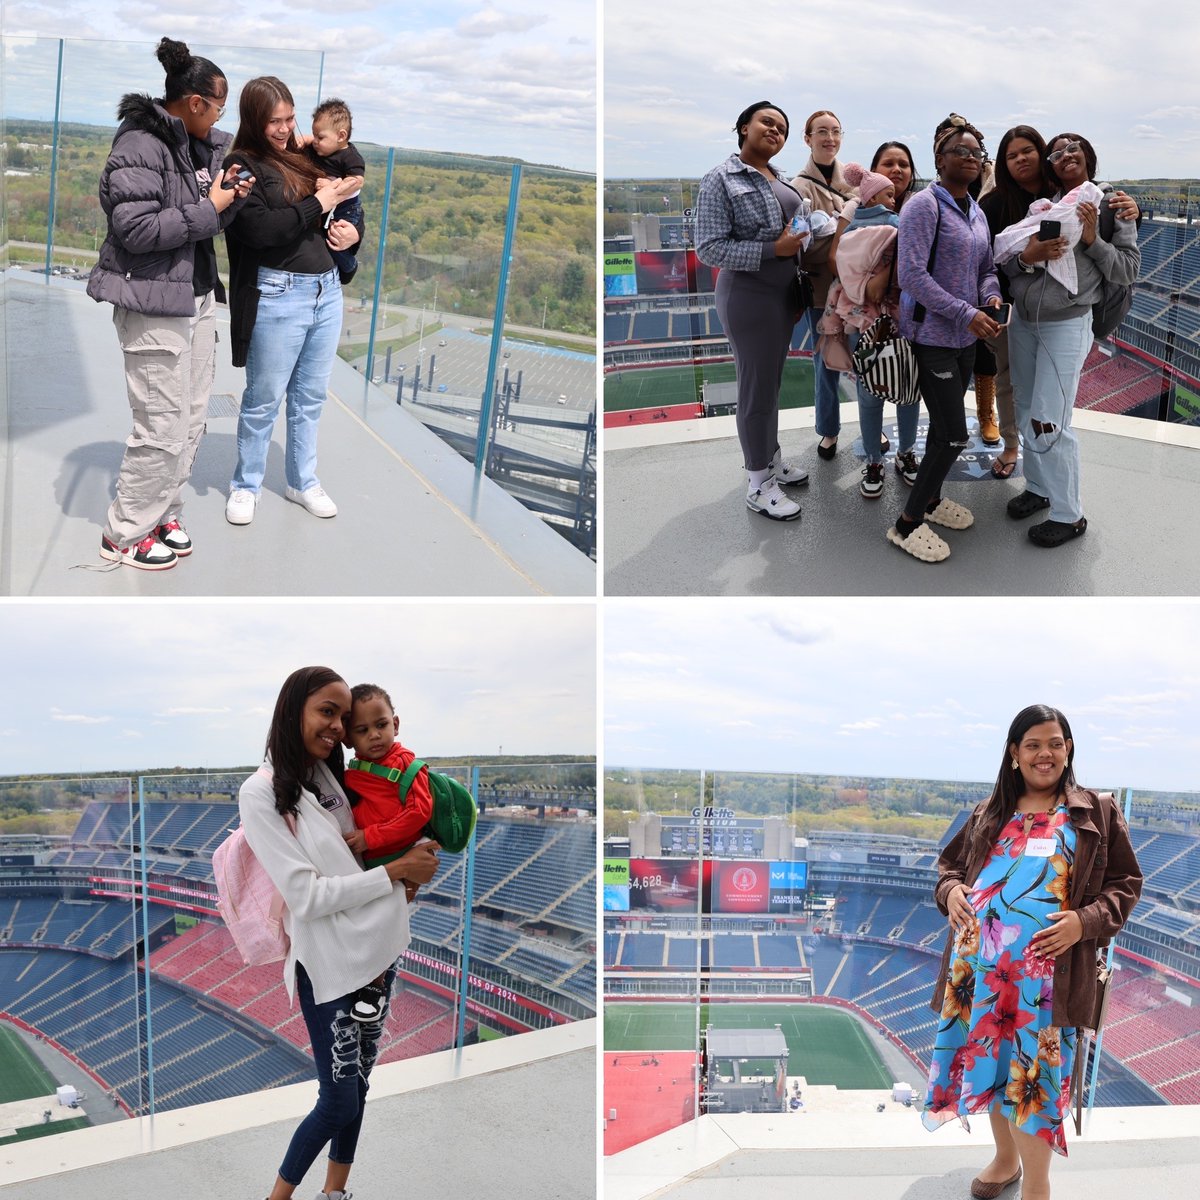 In honor of #MothersDay tomorrow, we want to spotlight the work of the Chauxdown Foundation who hosted a Luncheon this week for expecting mothers. Part of their lunch included visiting the top of the #Lighthouse @GilletteStadium, and we think their smiles sum up their experience!